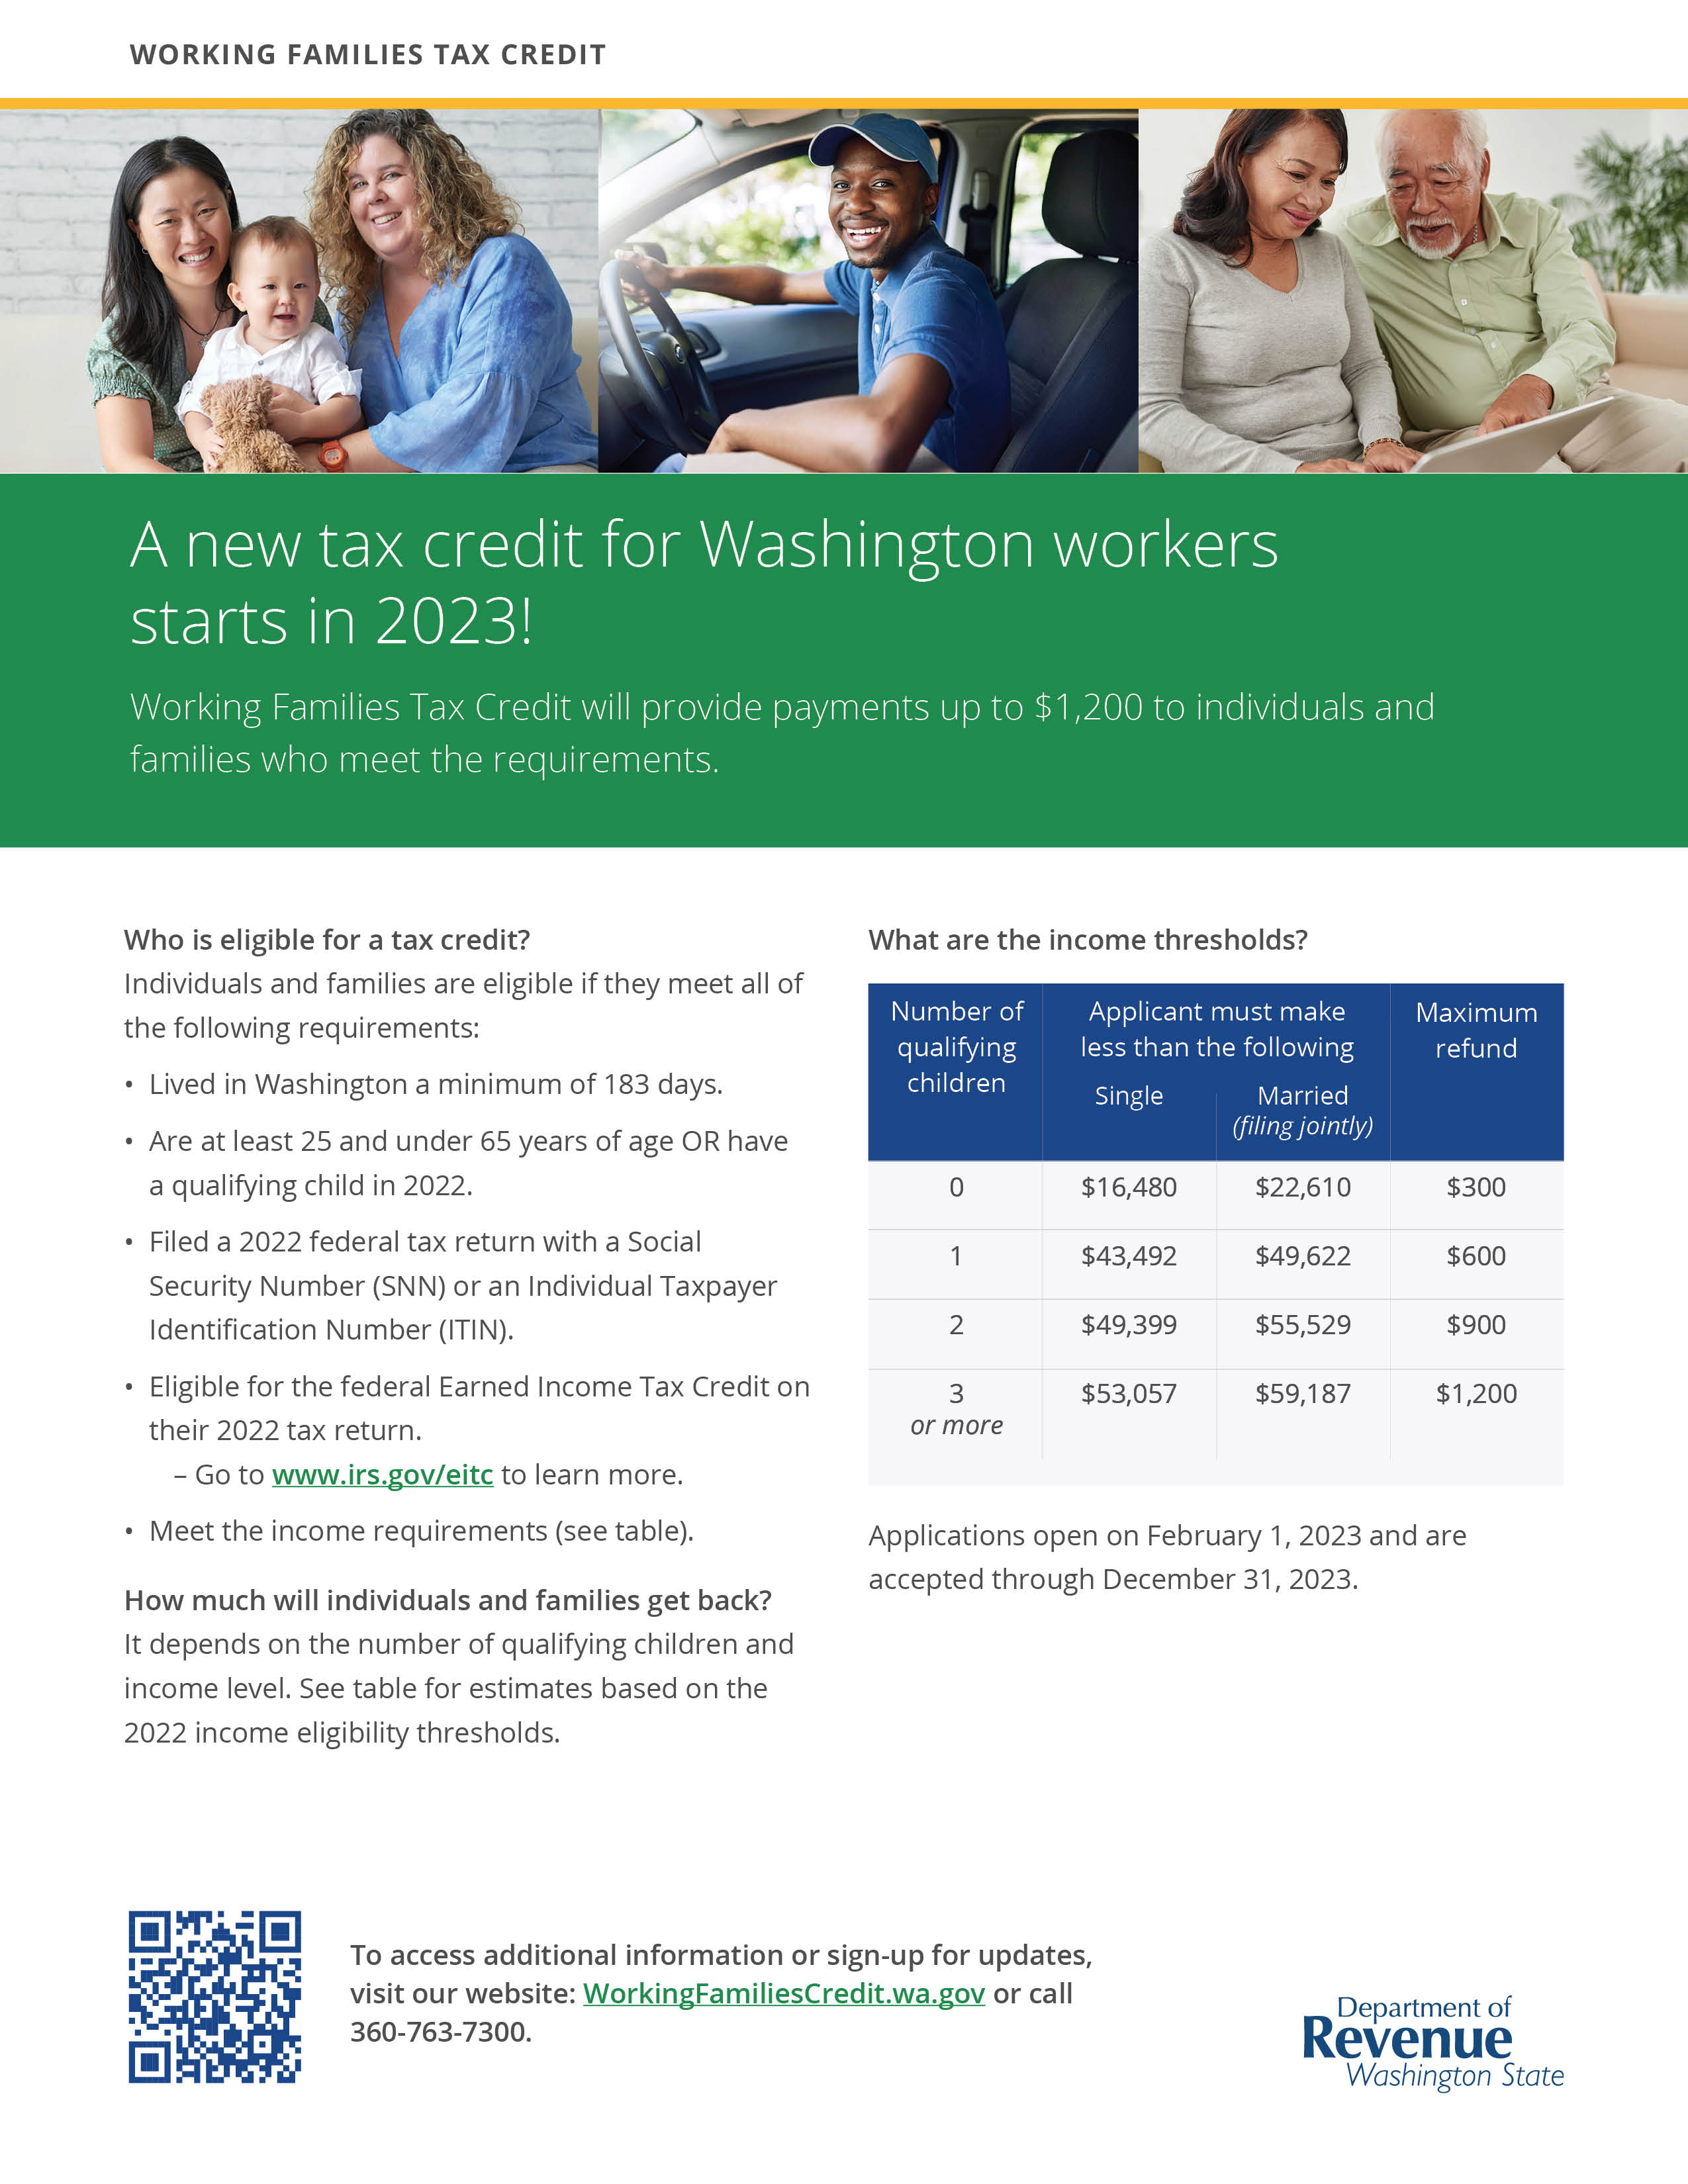 English language flyer for Working Families Tax Credit